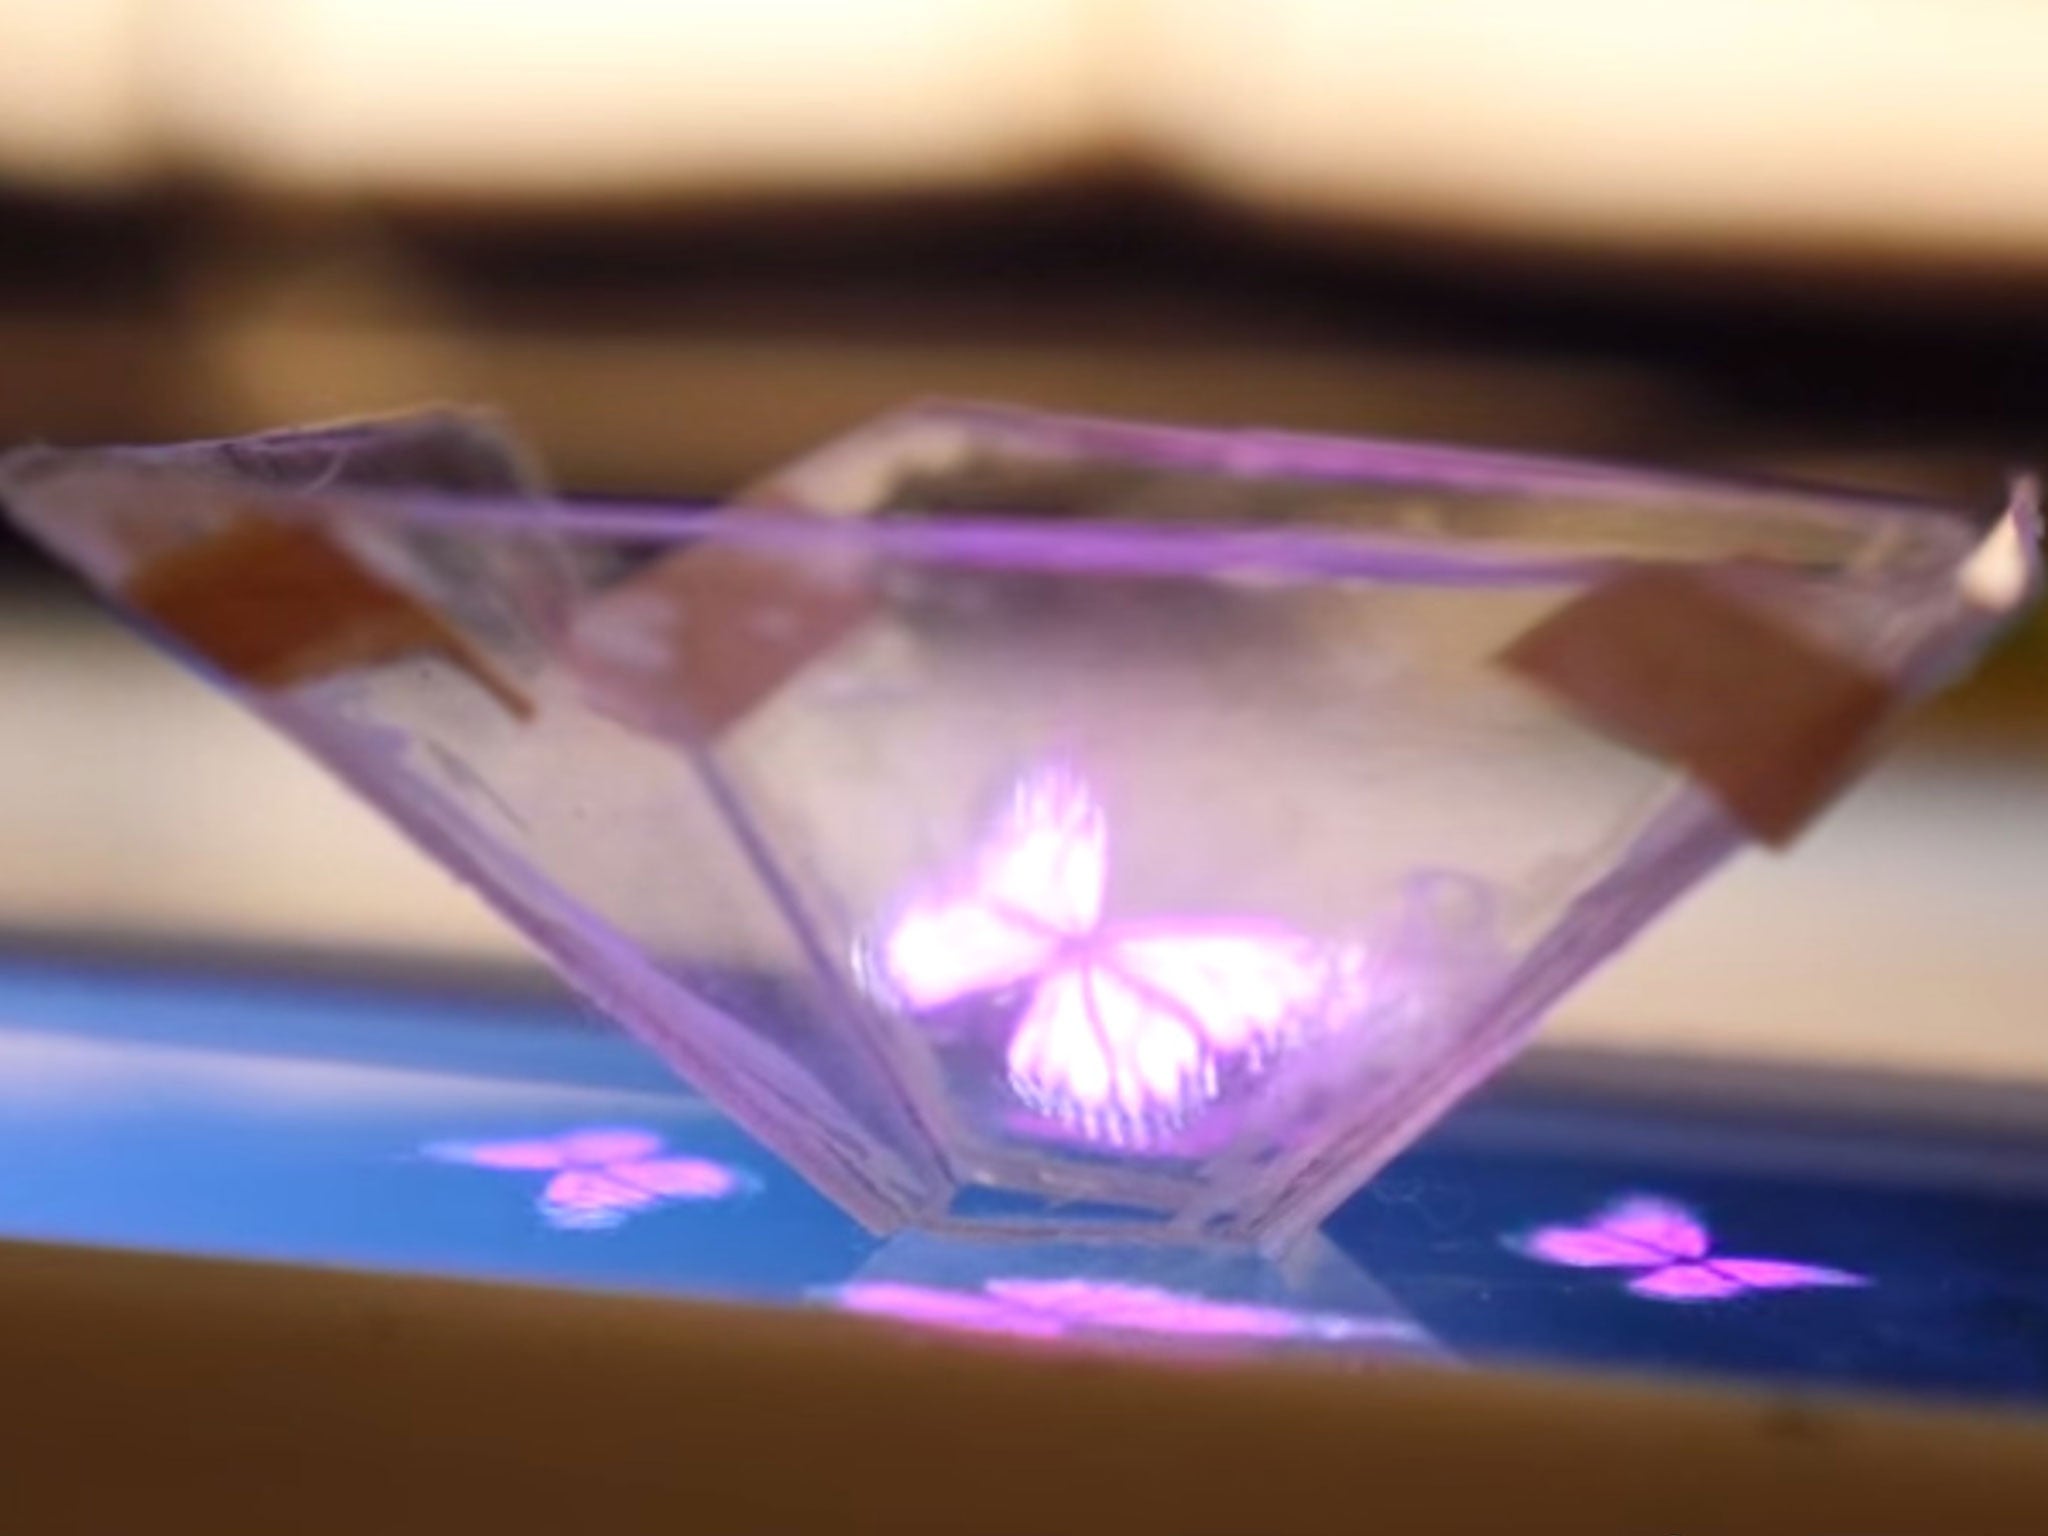 A butterfly hologram appears in the home-made device